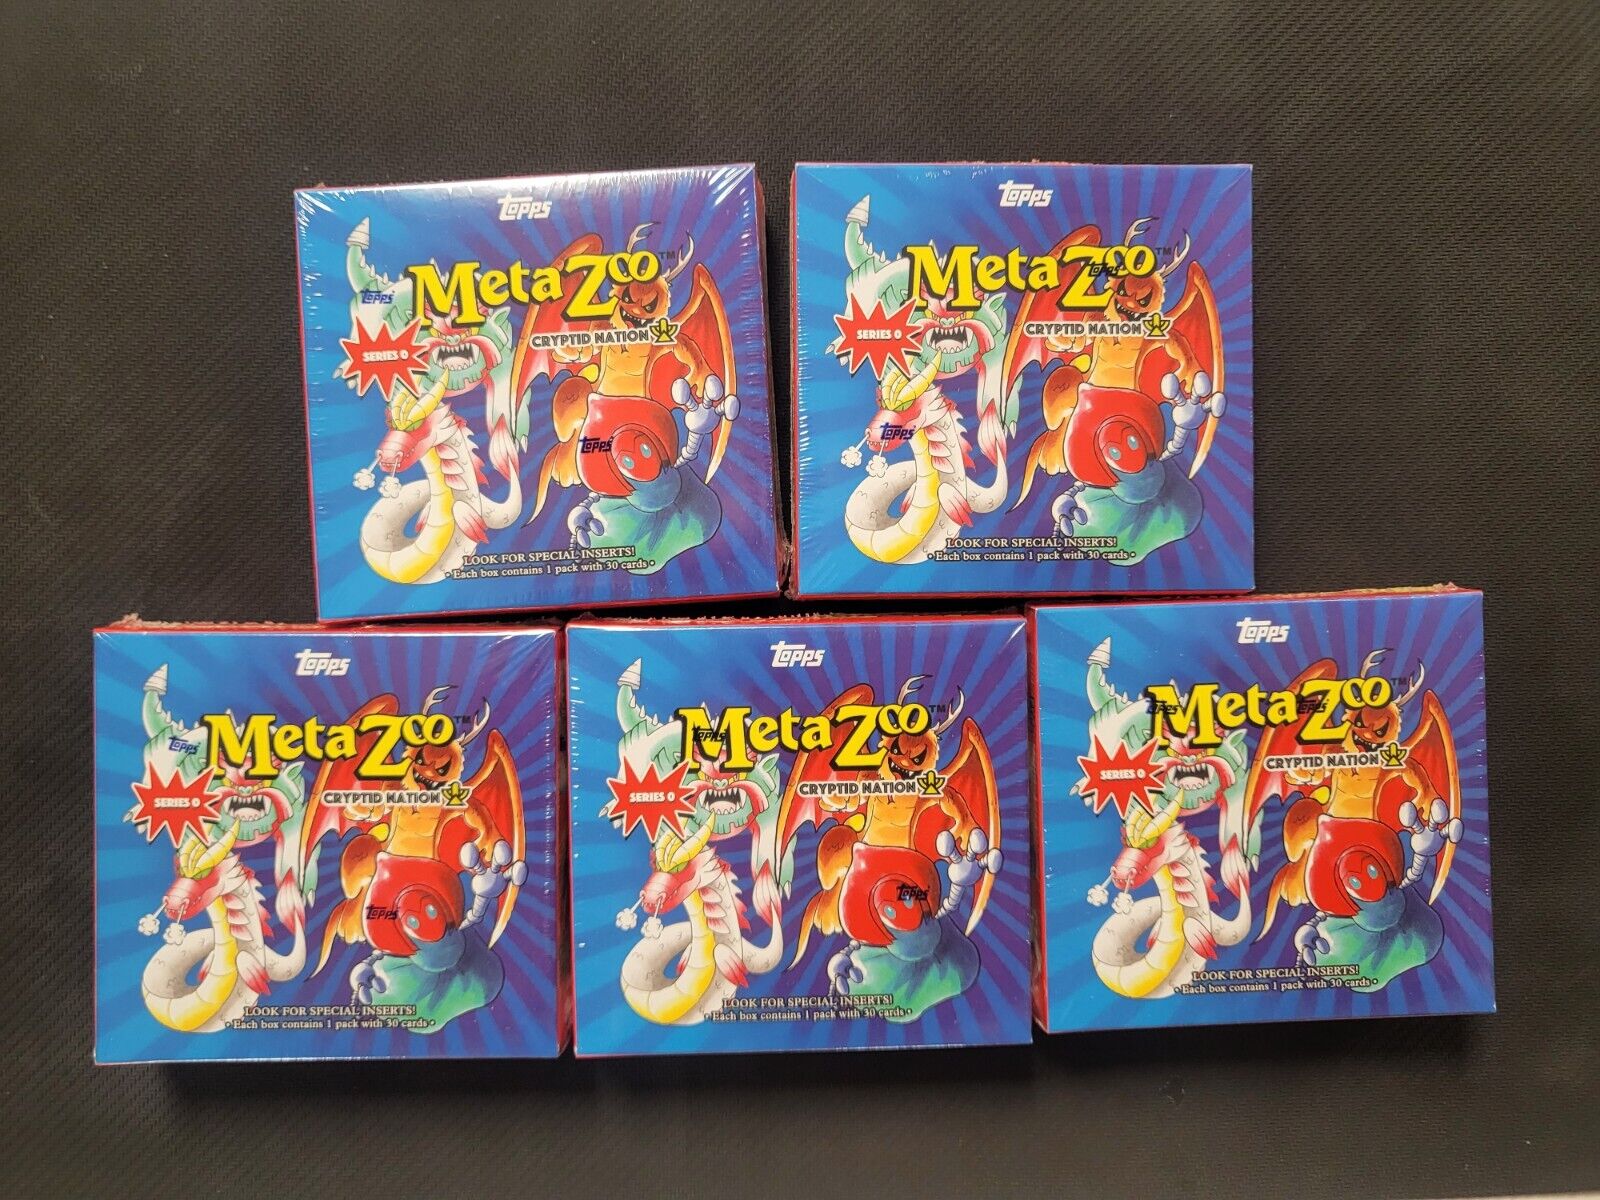 2021 Topps MetaZoo Cryptid Nation Series 0 Box 30 Card Pack LOT OF 5